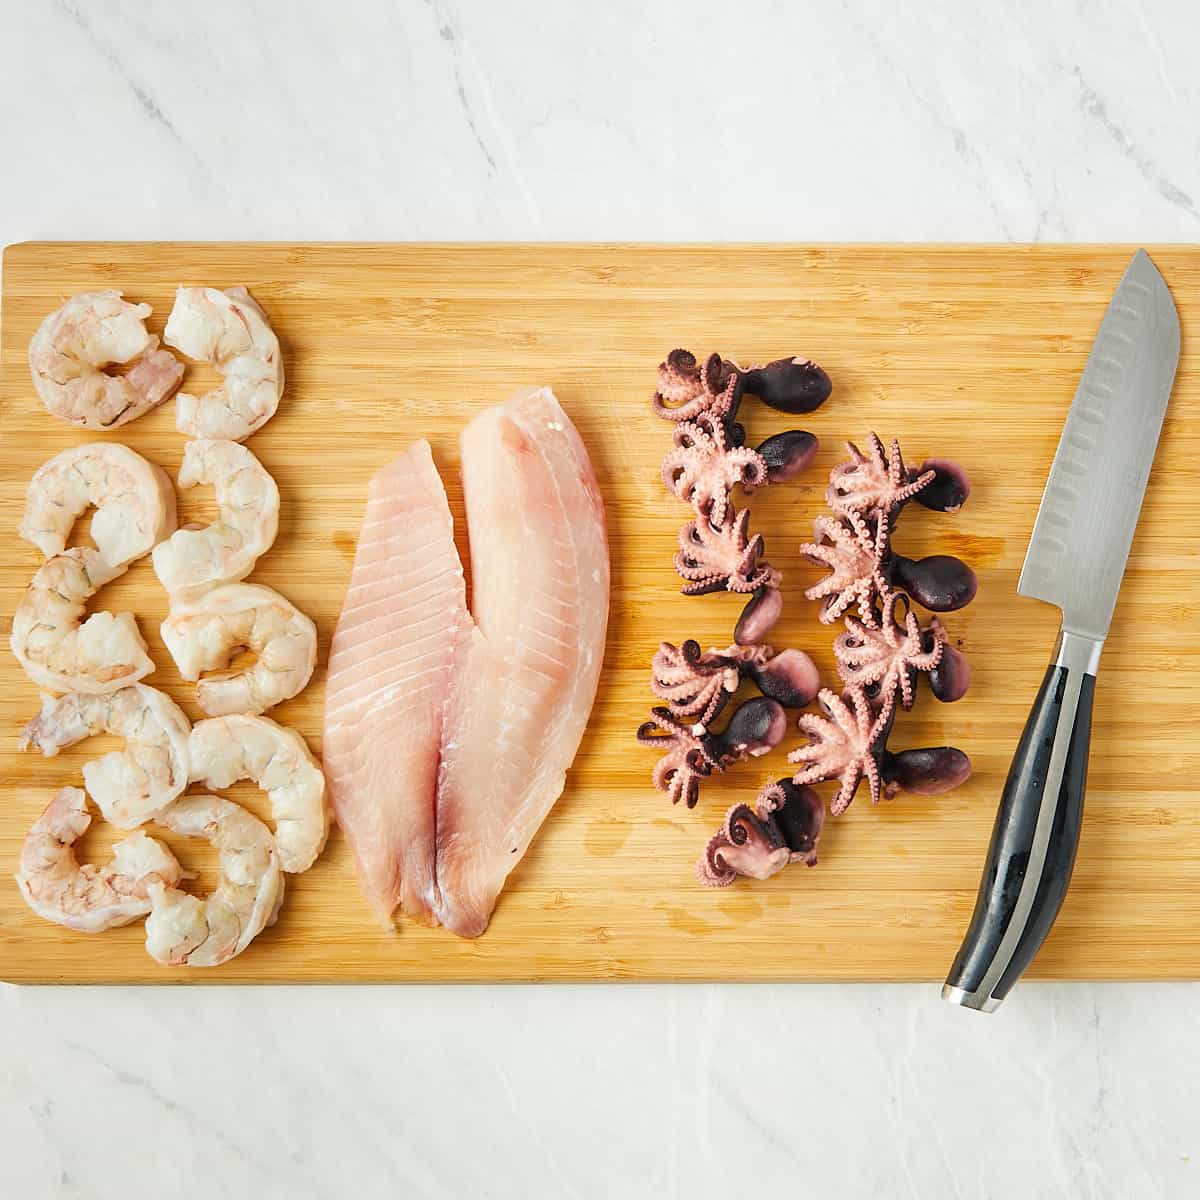 cooked baby octopus, raw tilapia, and raw shrimp on a wooden cutting board